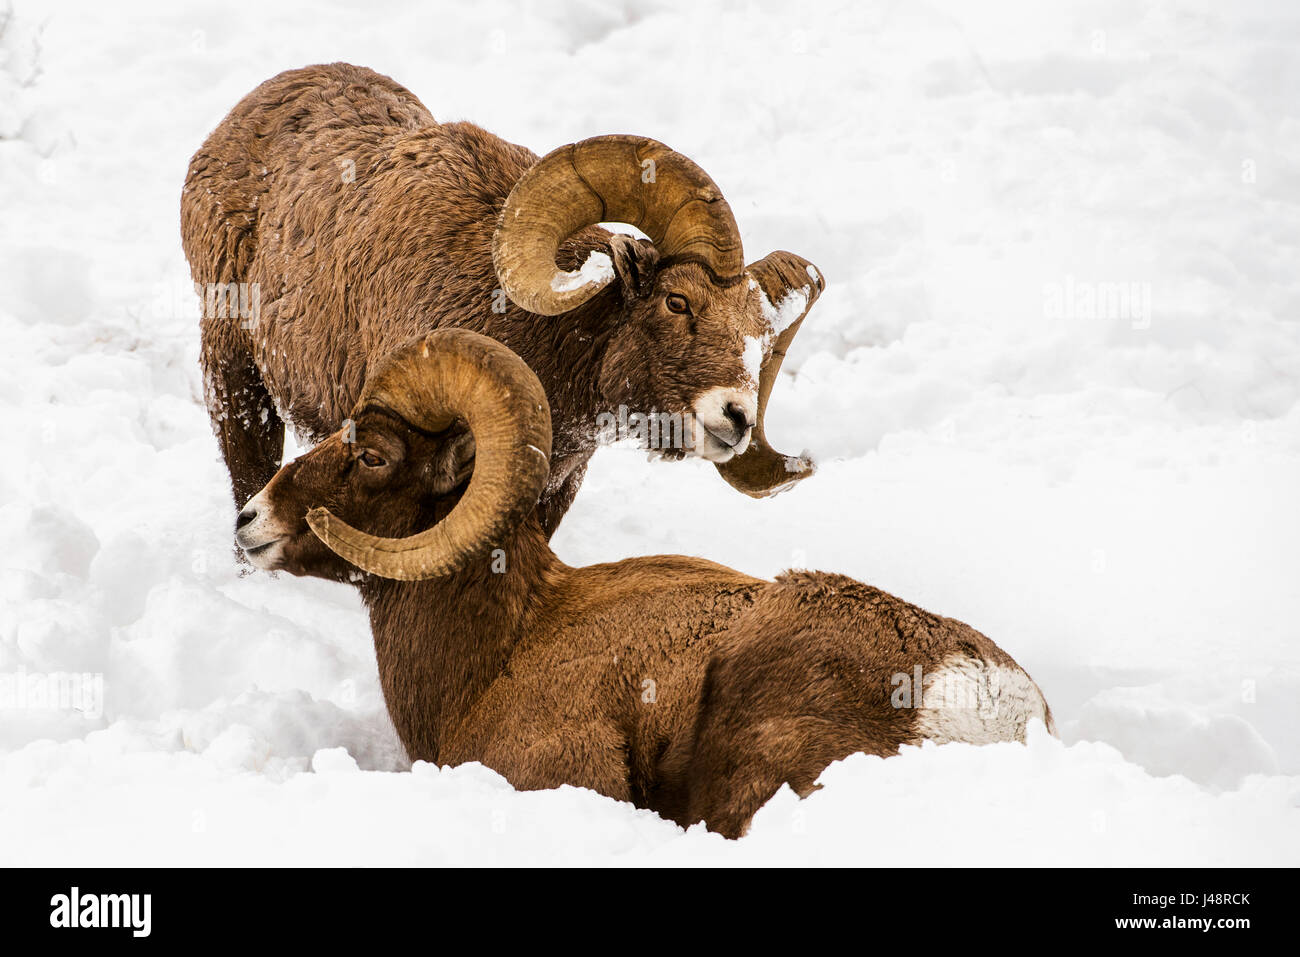 Large Bighorn Ram (Ovis canadensis) approaches another large Bighorn ram lying in the snow, Shoshone National Forest Stock Photo